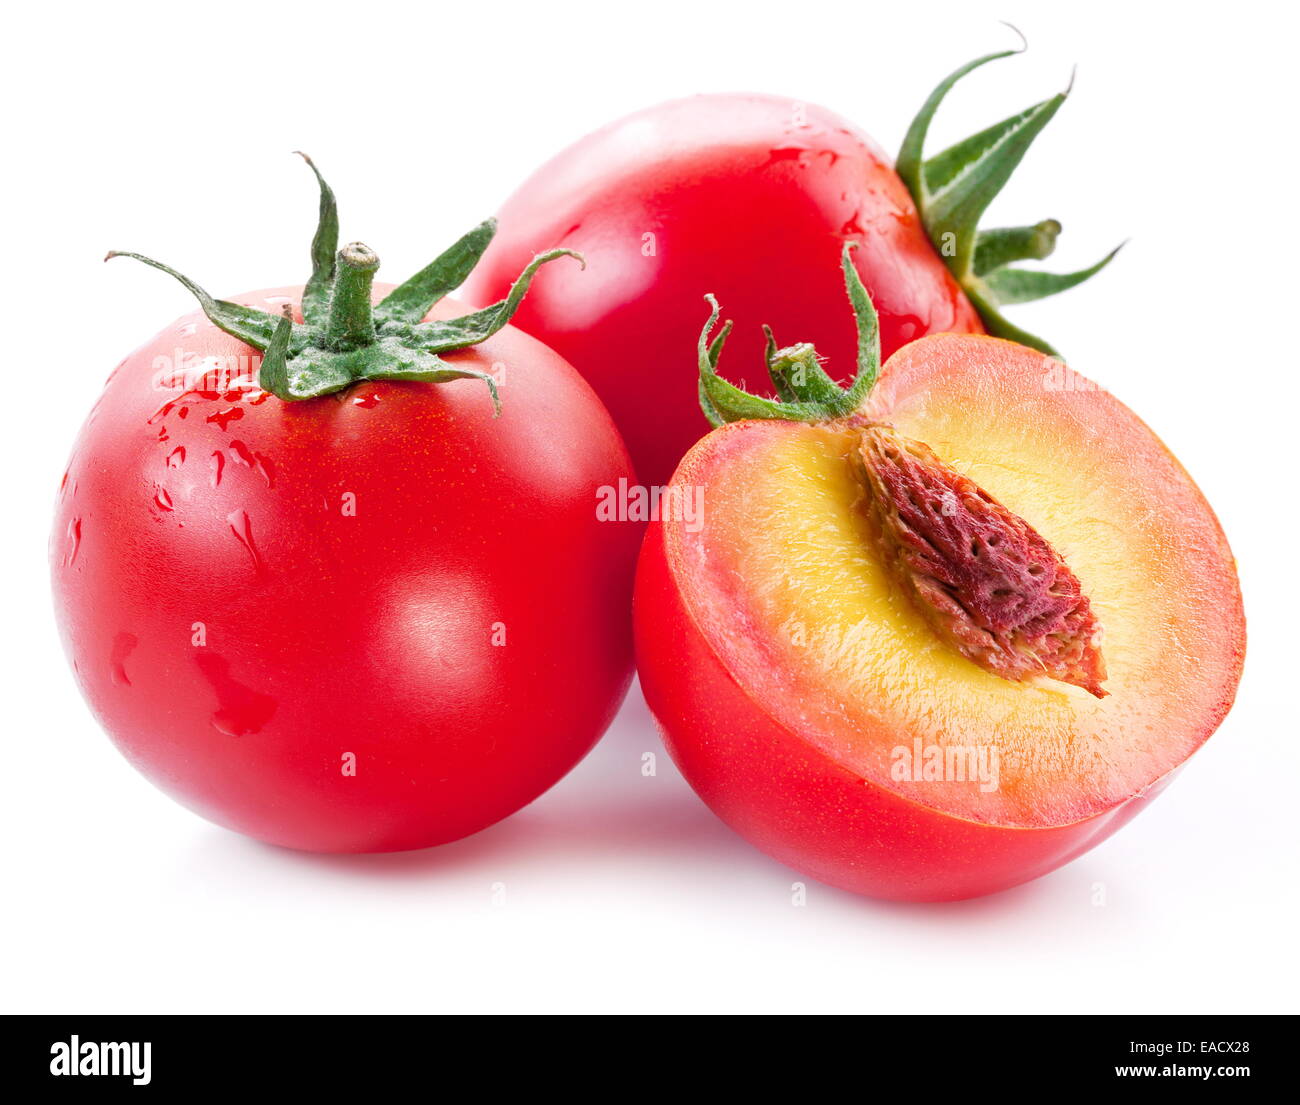 Flesh tomatoes in cut as a ripe peach. Product of genetic engineering. Computer assembly. Stock Photo